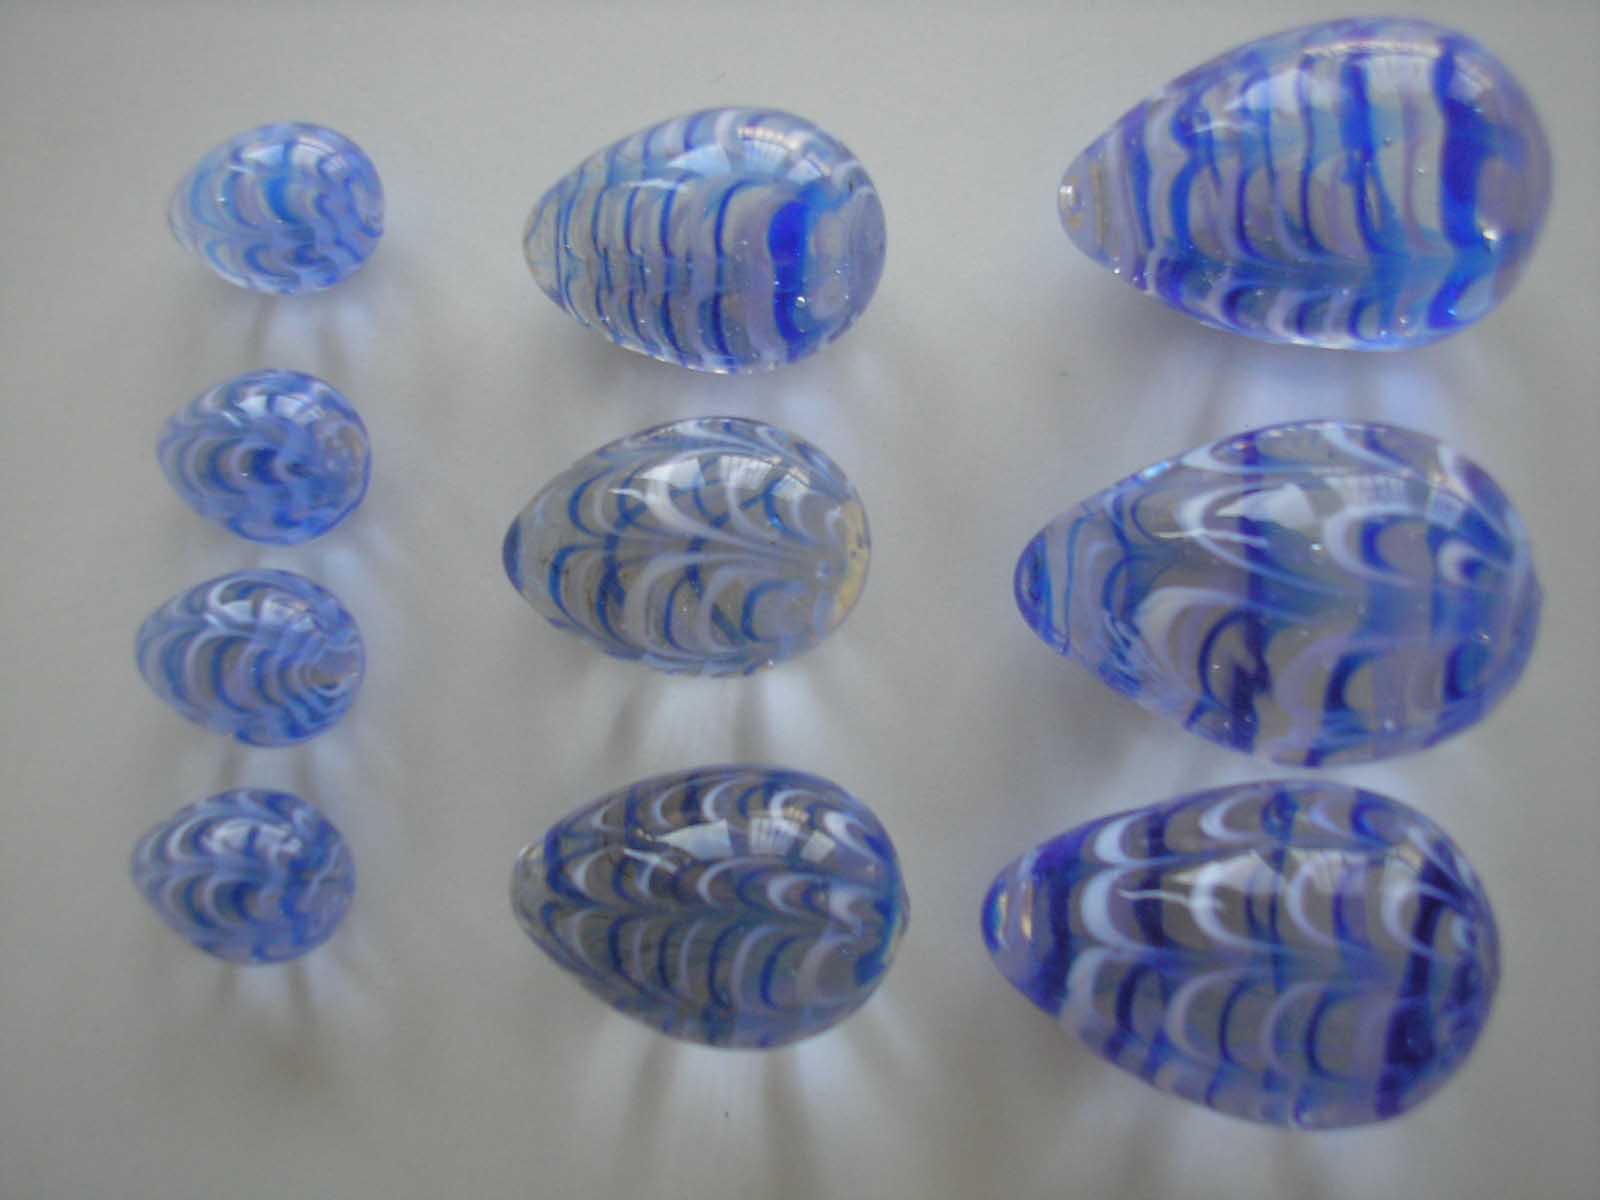  Glass Eggs For Easter Day (Стекло яиц на Пасху)